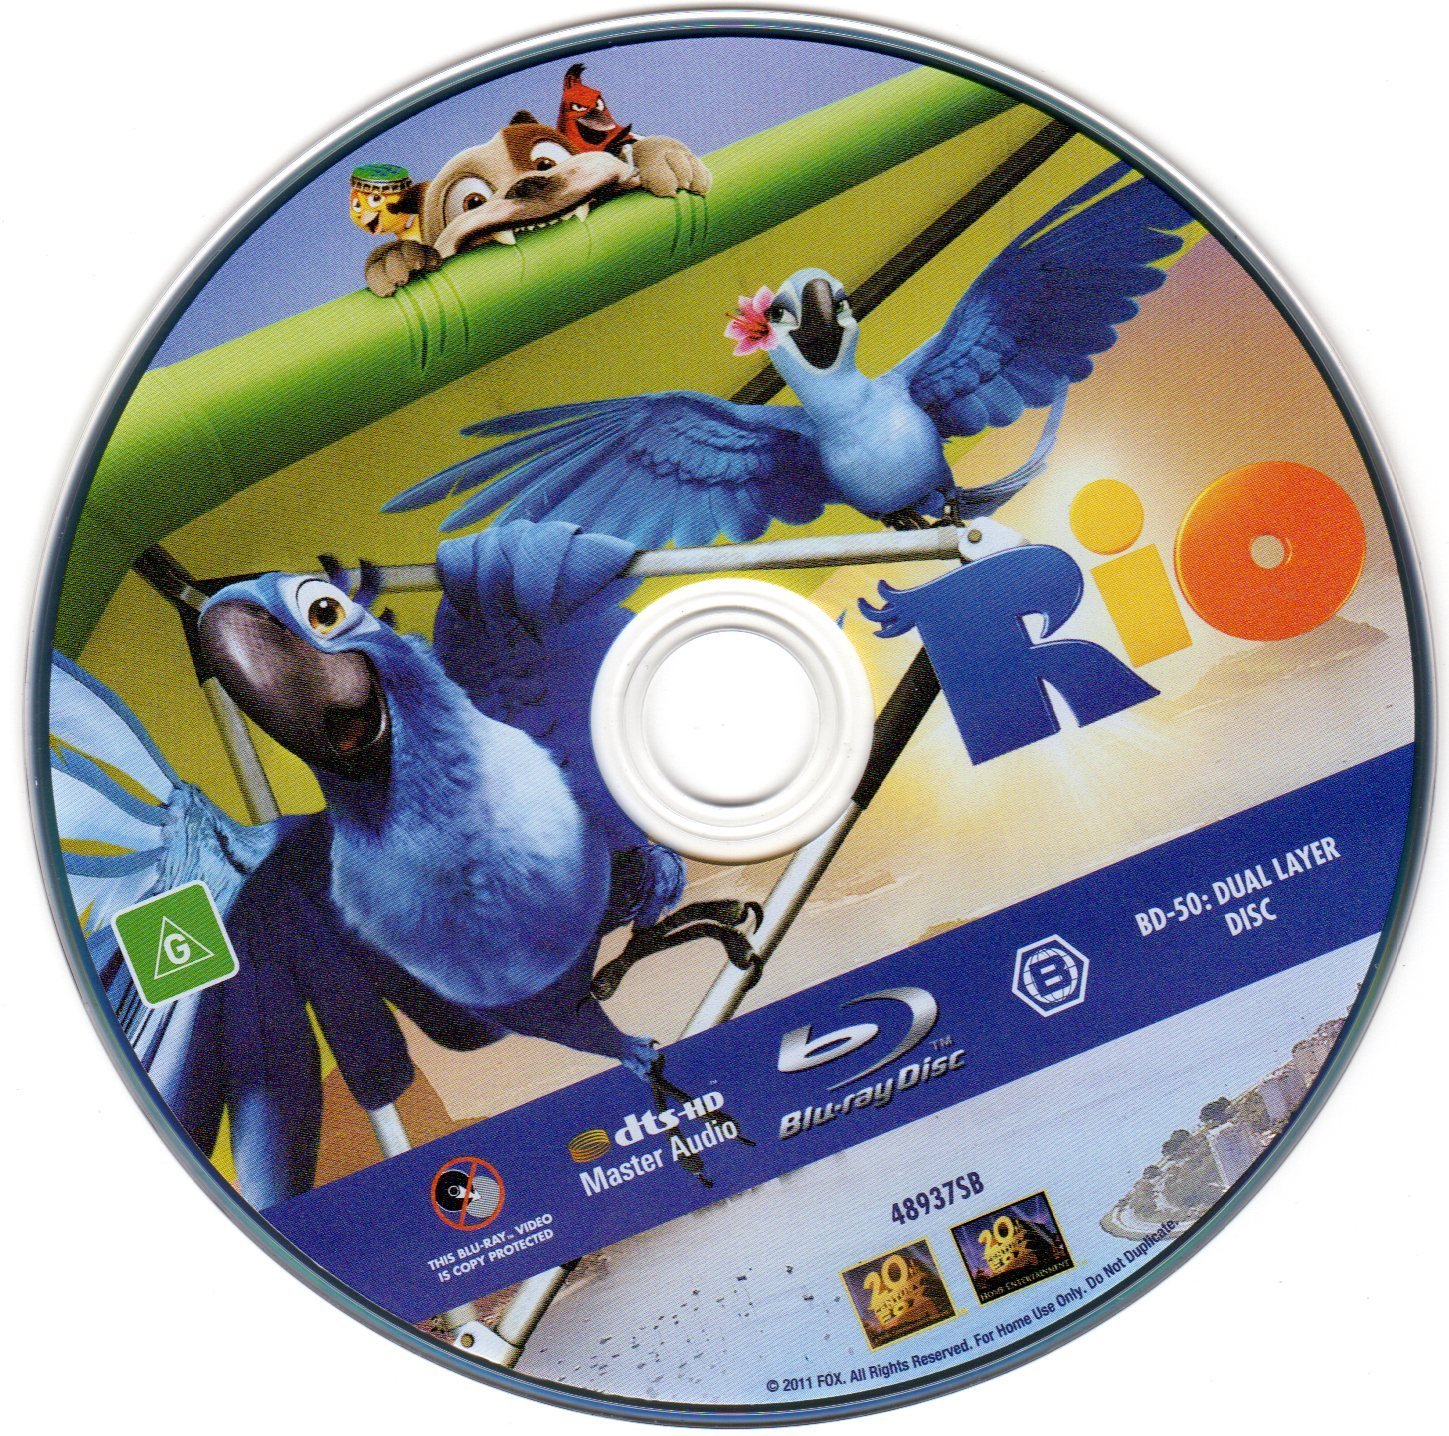 Rio 11 Dvd Covers And Labels